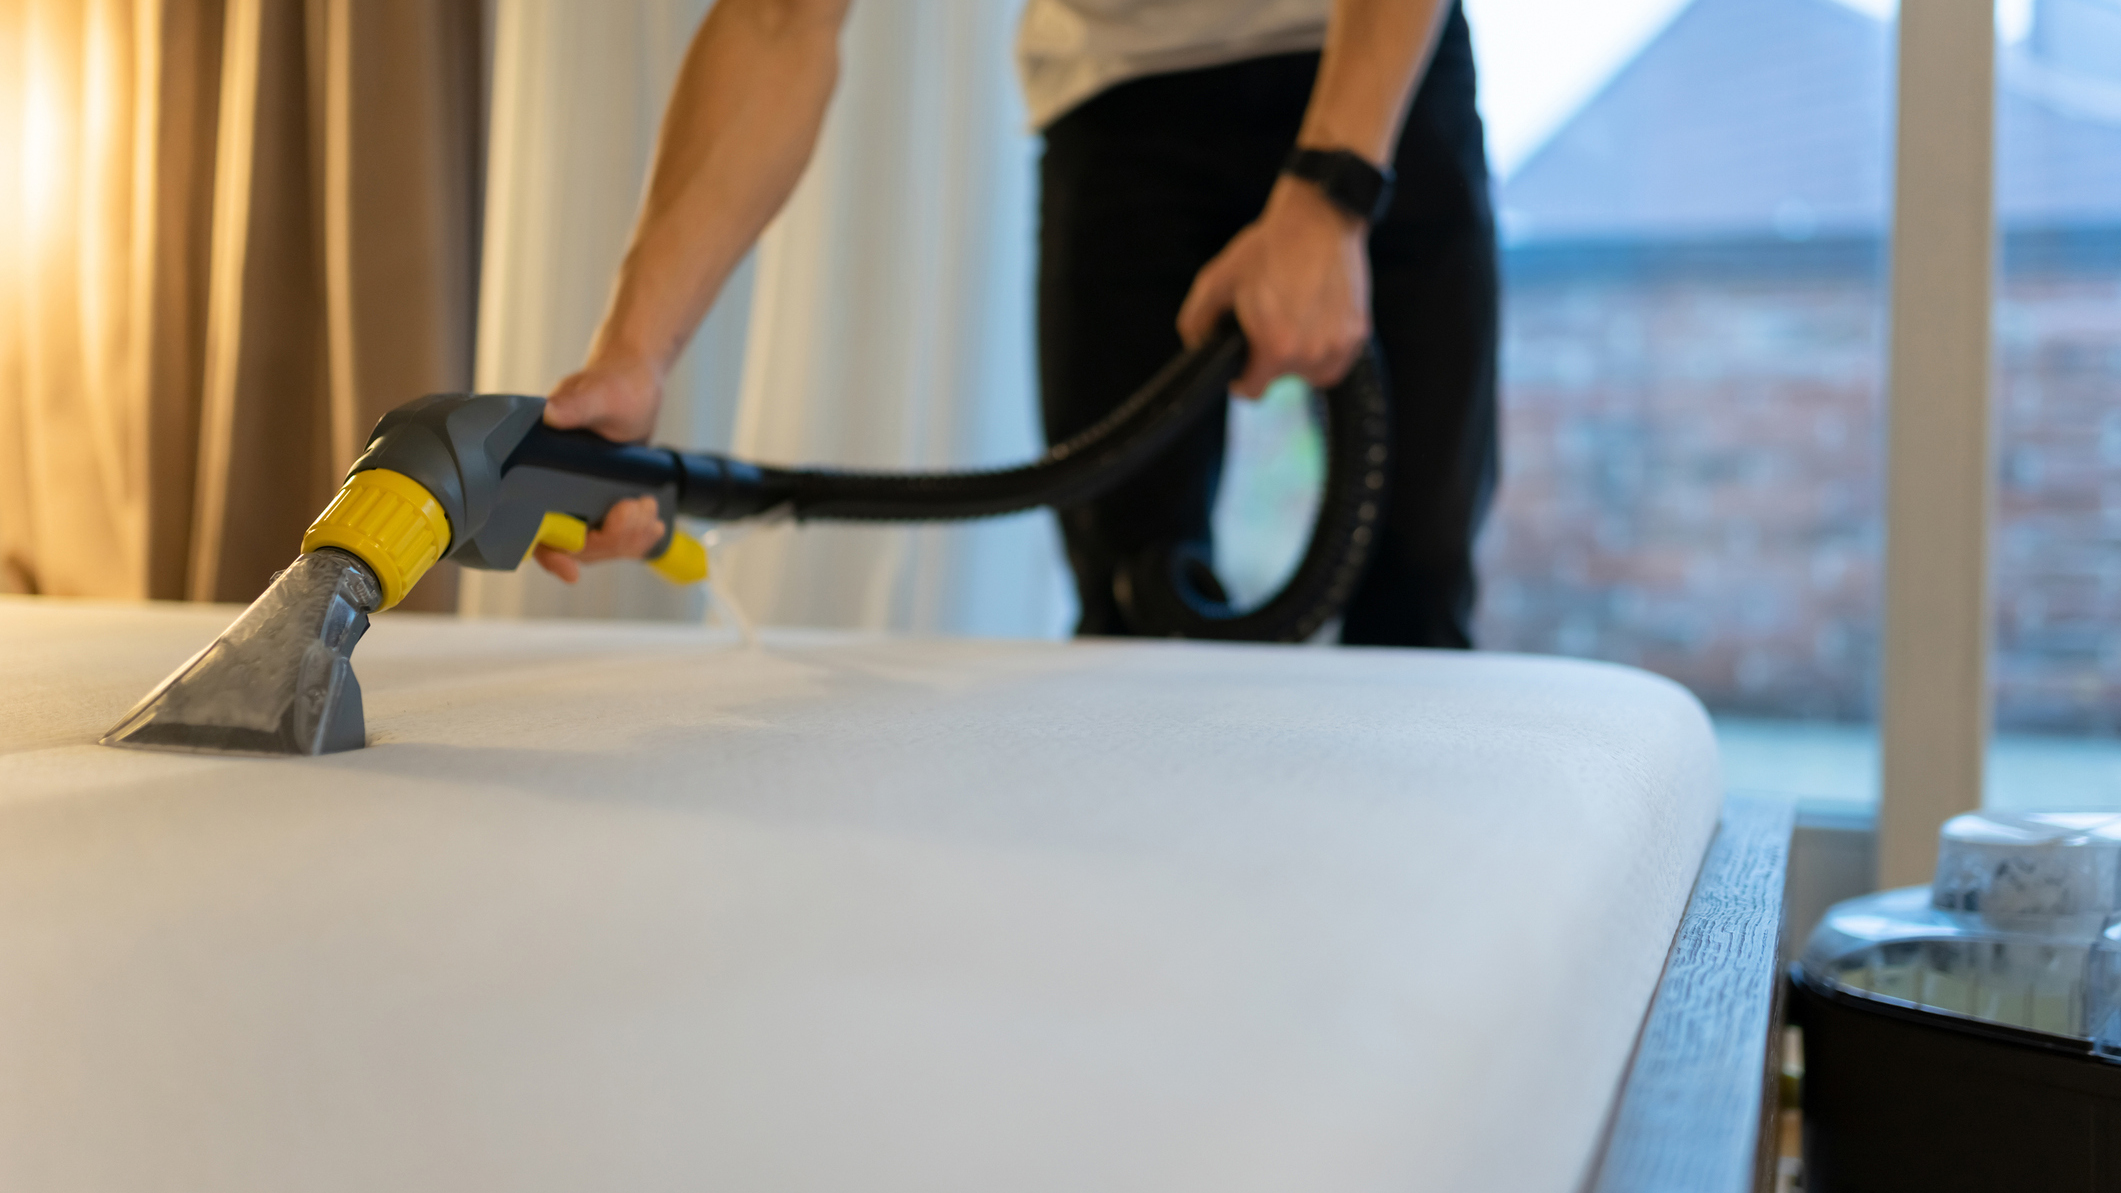 A Step-By-Step Guide to Steam Cleaning Your Mattress